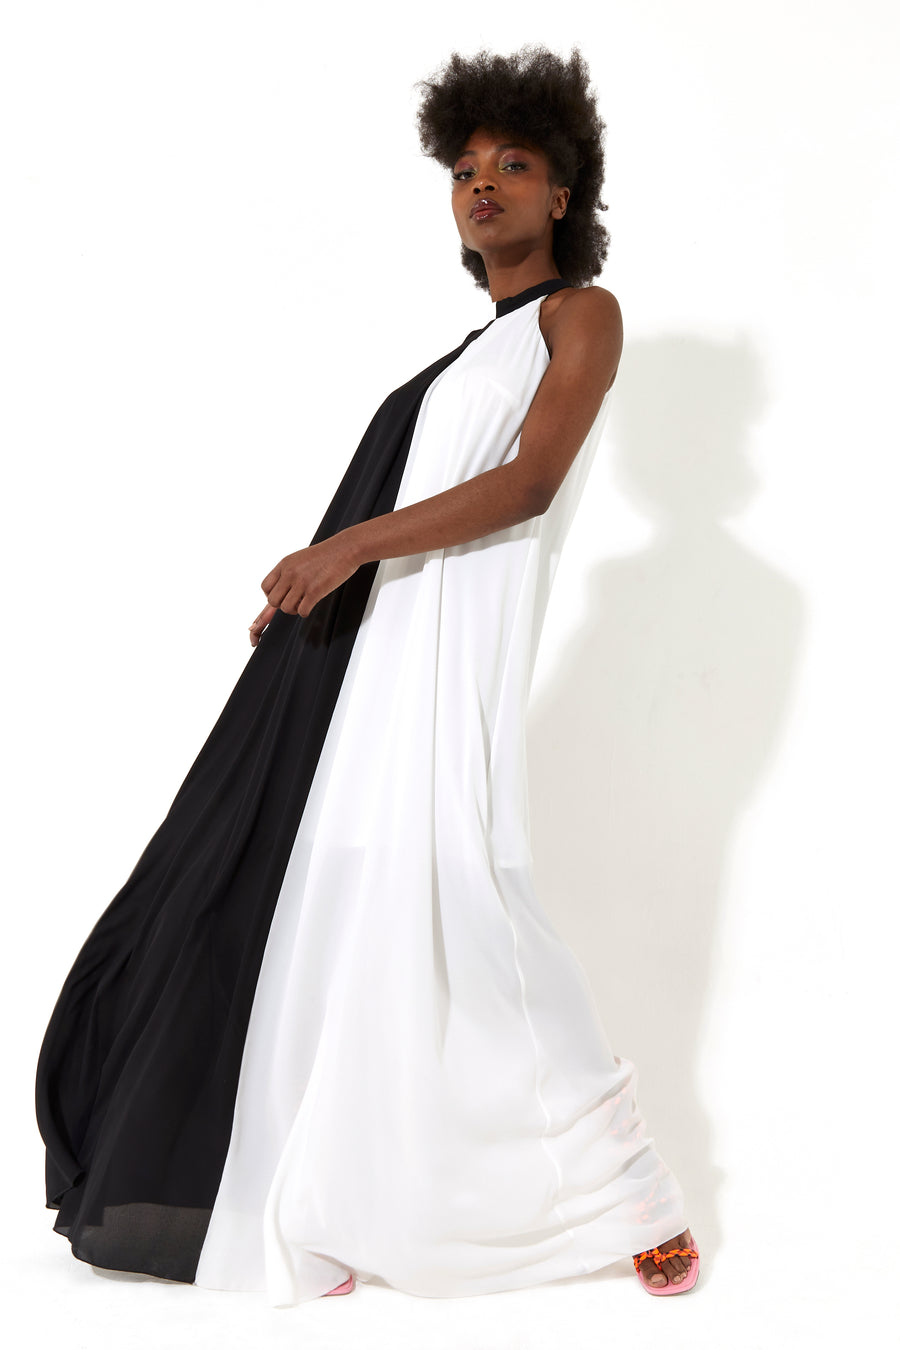 HOUSE OF HOLLAND HALTER NECK SLEEVELESS DRAMATIC MAXI DRESS IN BLACK AND WHITE